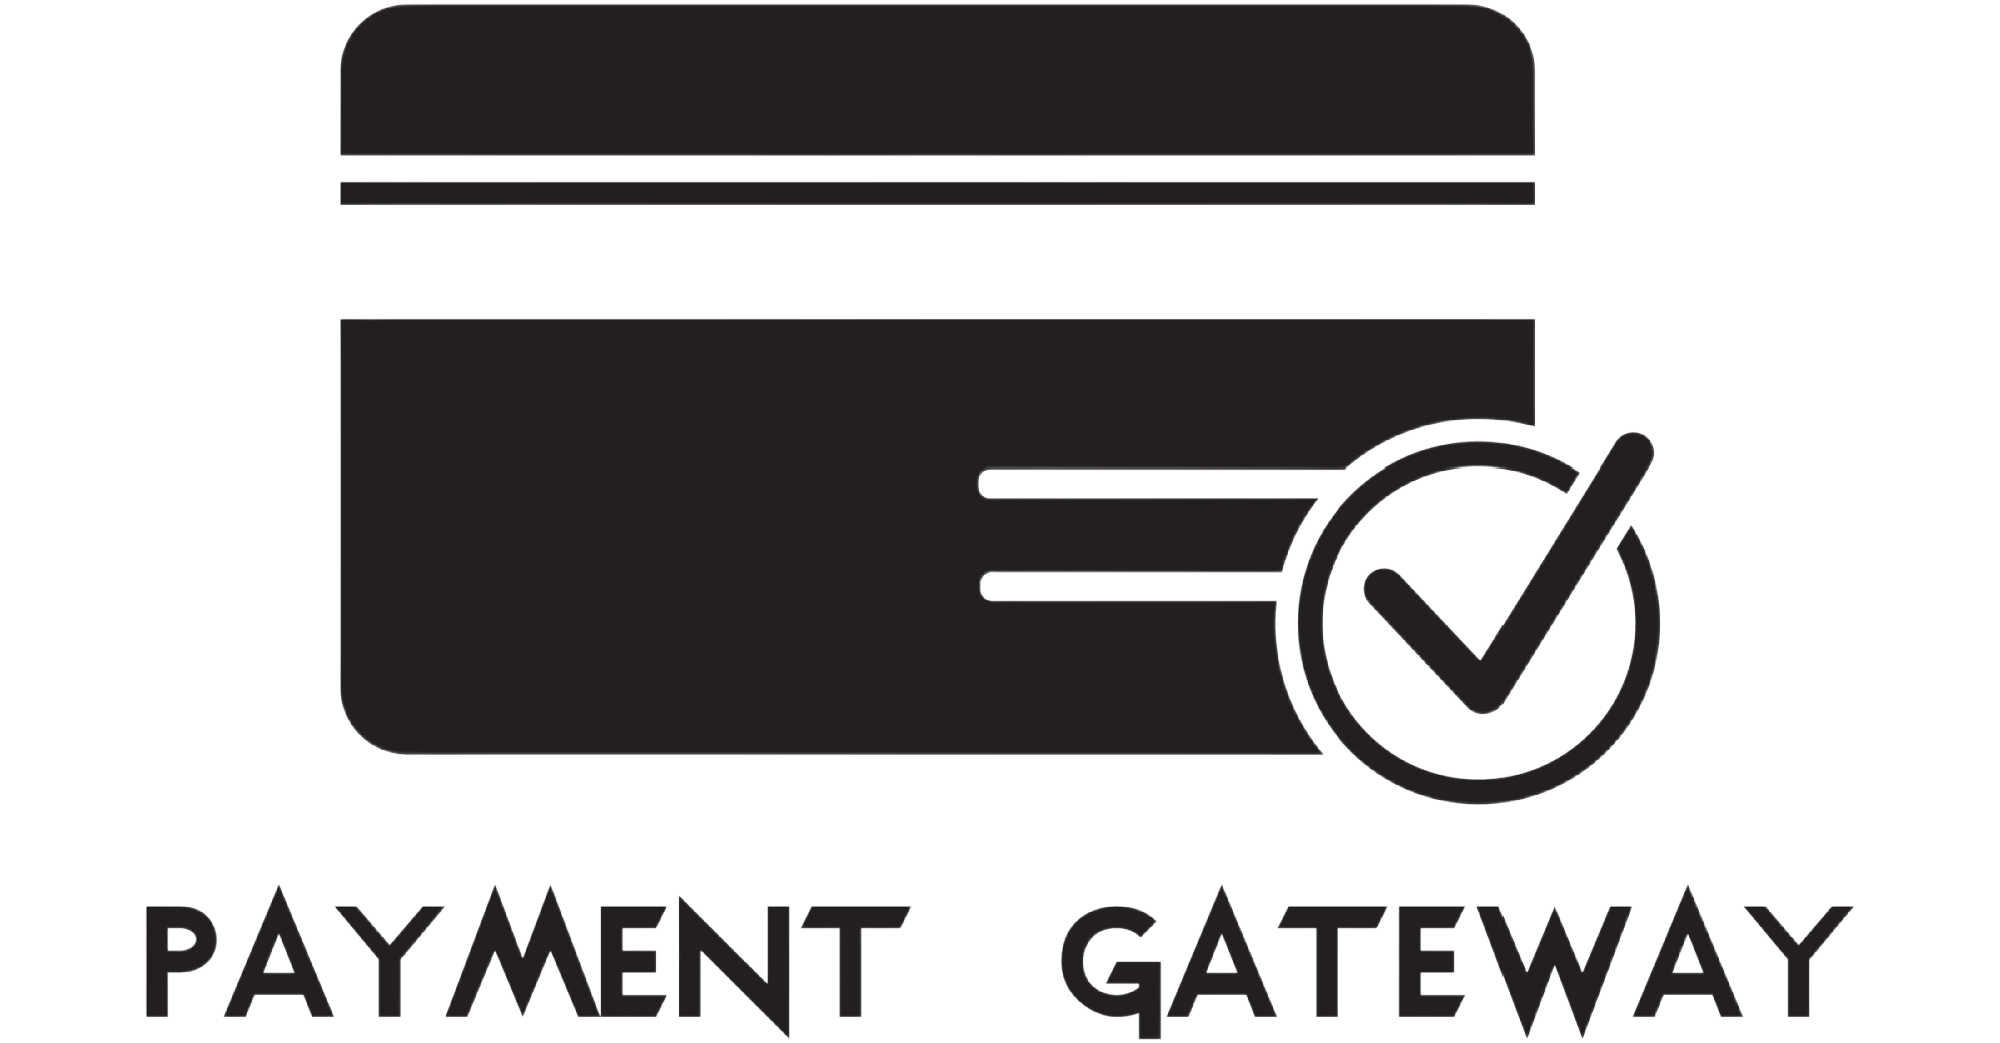 image of epay global payment gateway